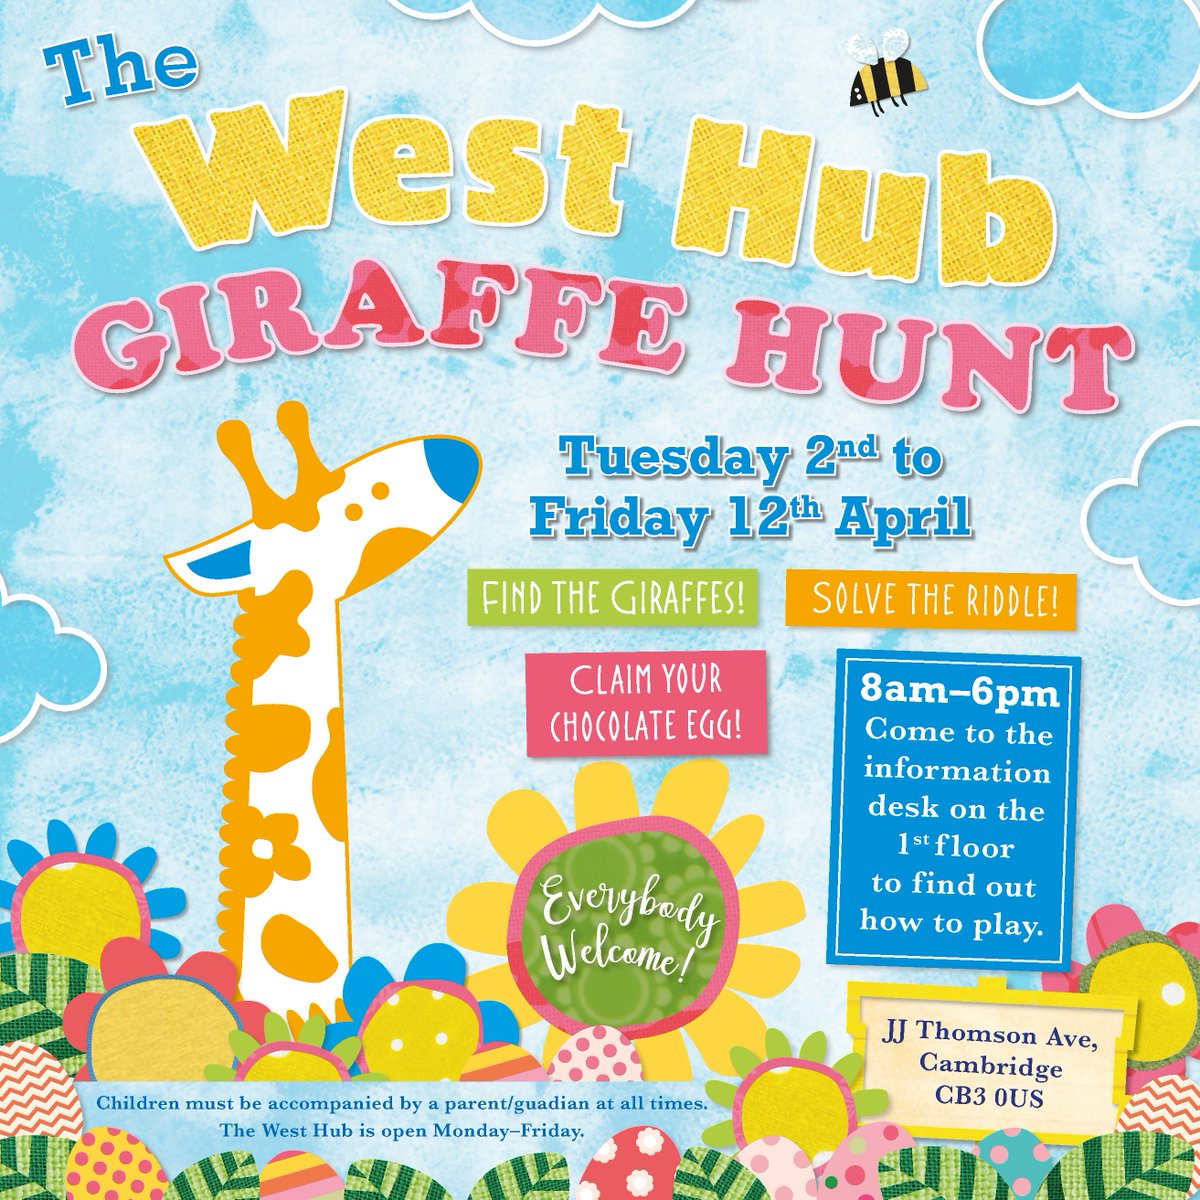 🦒Join Hubert on an adventure at the West Hub Giraffe Hunt!🦒 📅 When: Tuesday, 2nd April - Friday, 12th April 🕗 Time: 8am - 6pm daily 🔍 Come and find the hidden giraffes, solve the riddle, and claim your delicious chocolate egg! 🍫 🌟 Everybody is welcome to participate! 🌟